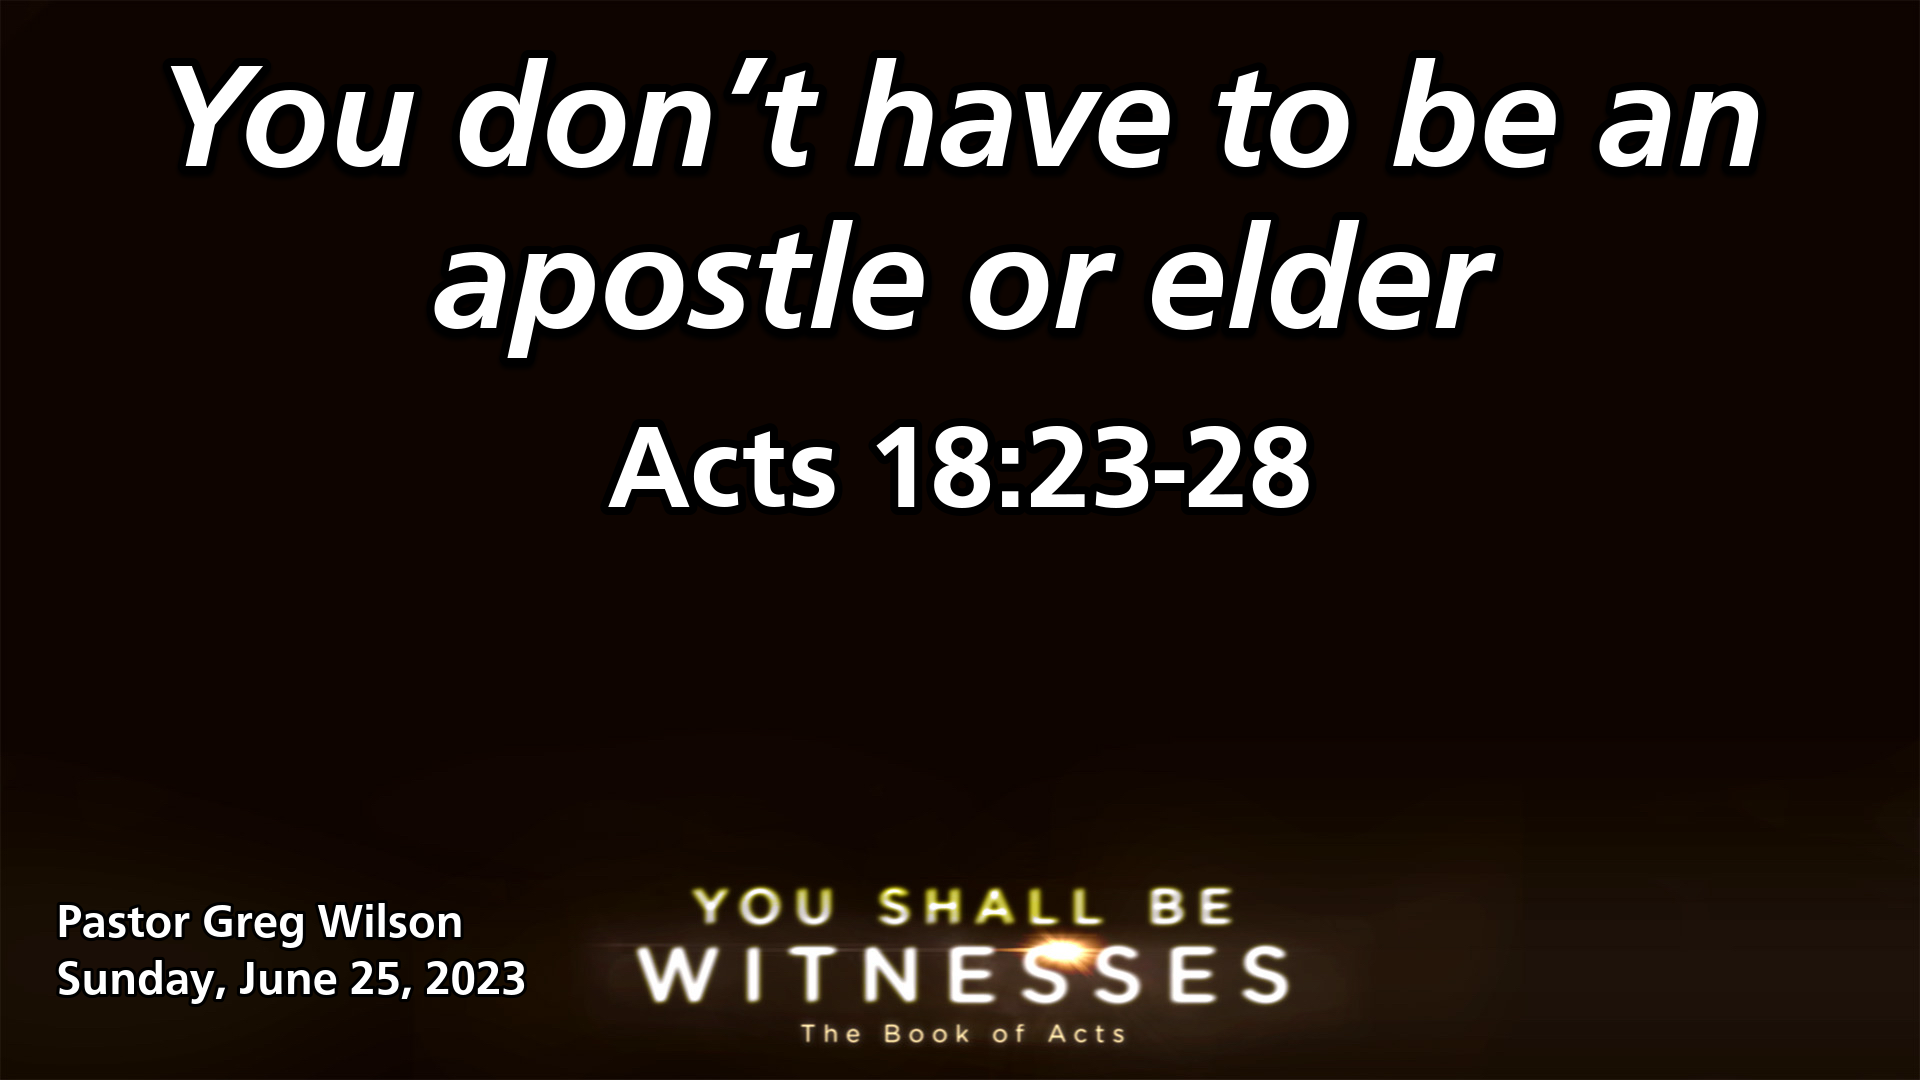 "You don’t have to be an apostle or elder"